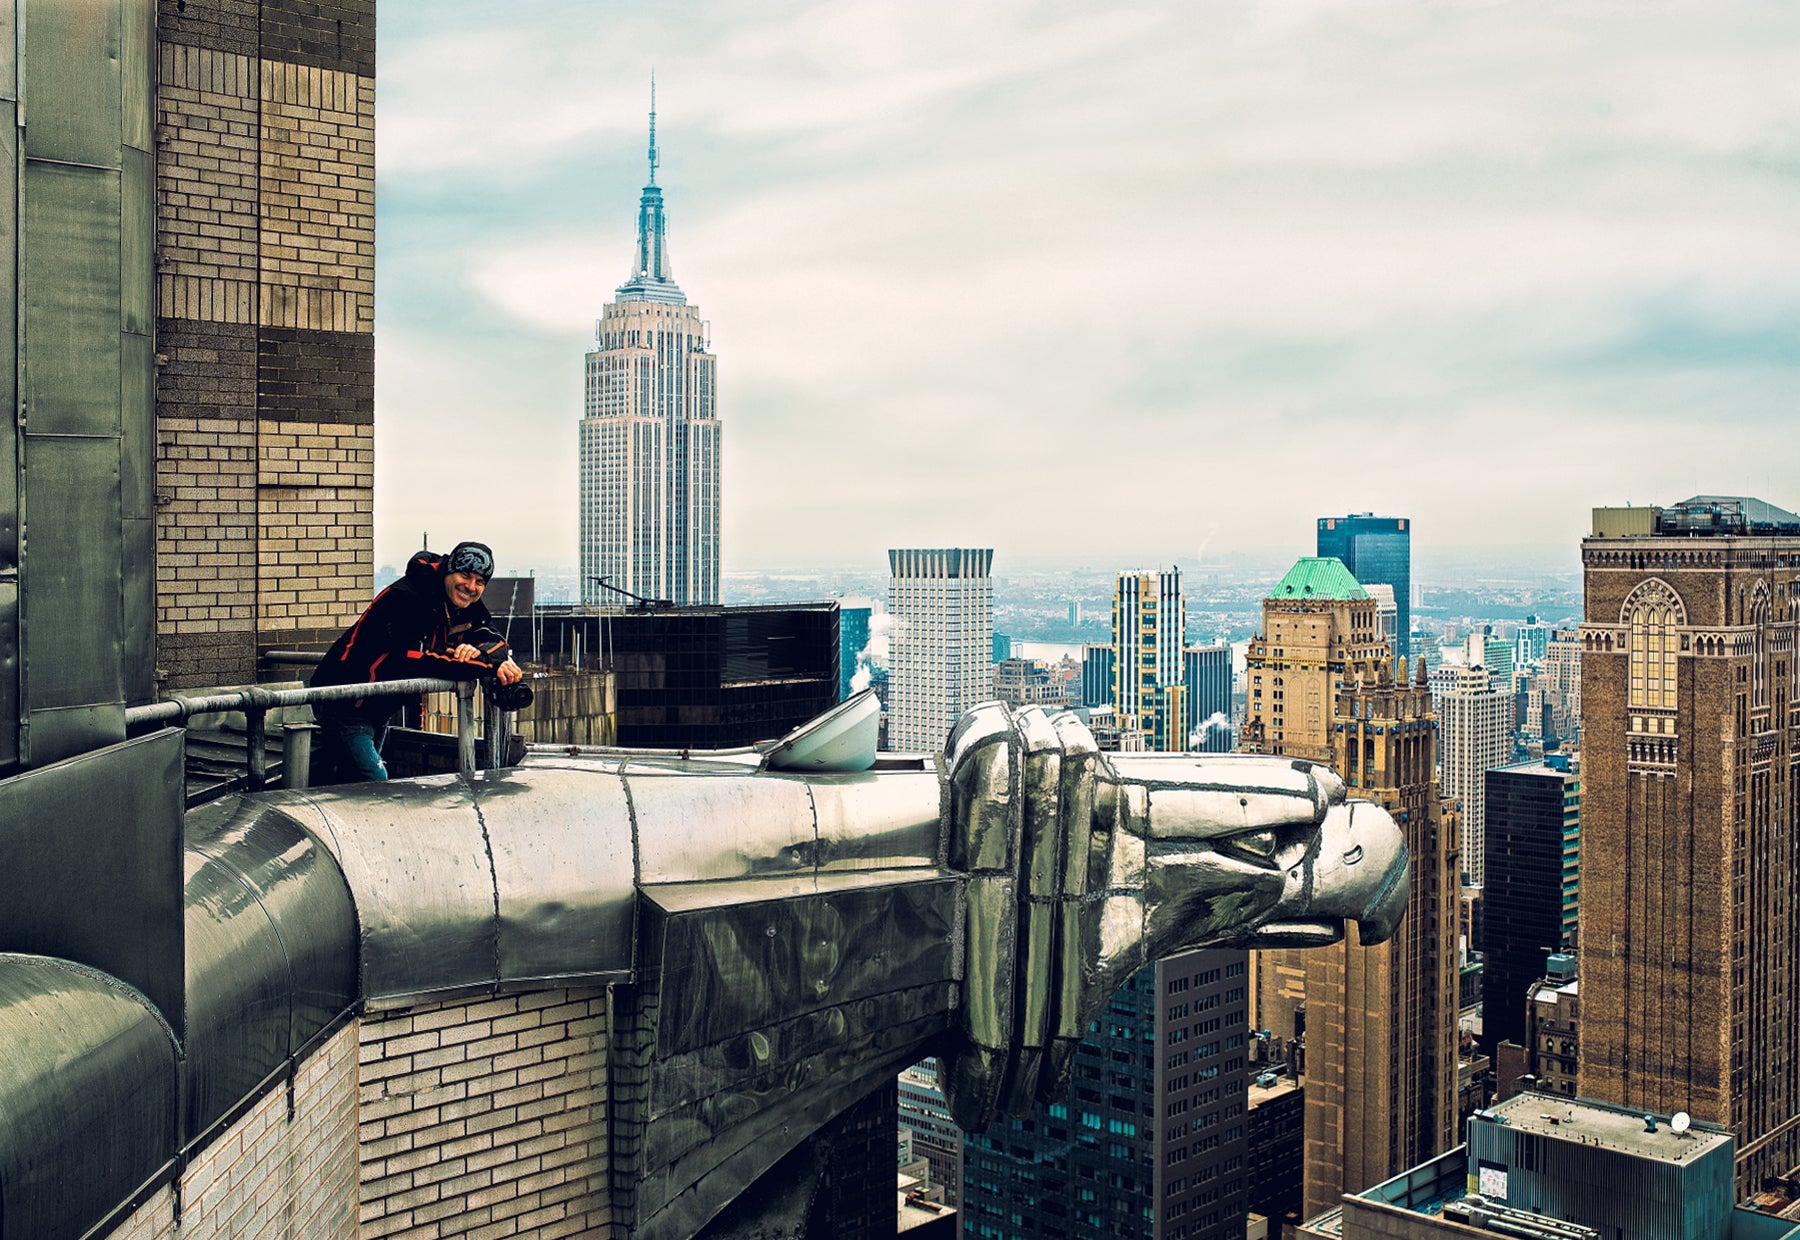 Portrait of Peter Lik captured next to one of the stainless steel Eagle-headed gargoyles on the top of the Chrysler Building with the skyscrapers of New York City in the background